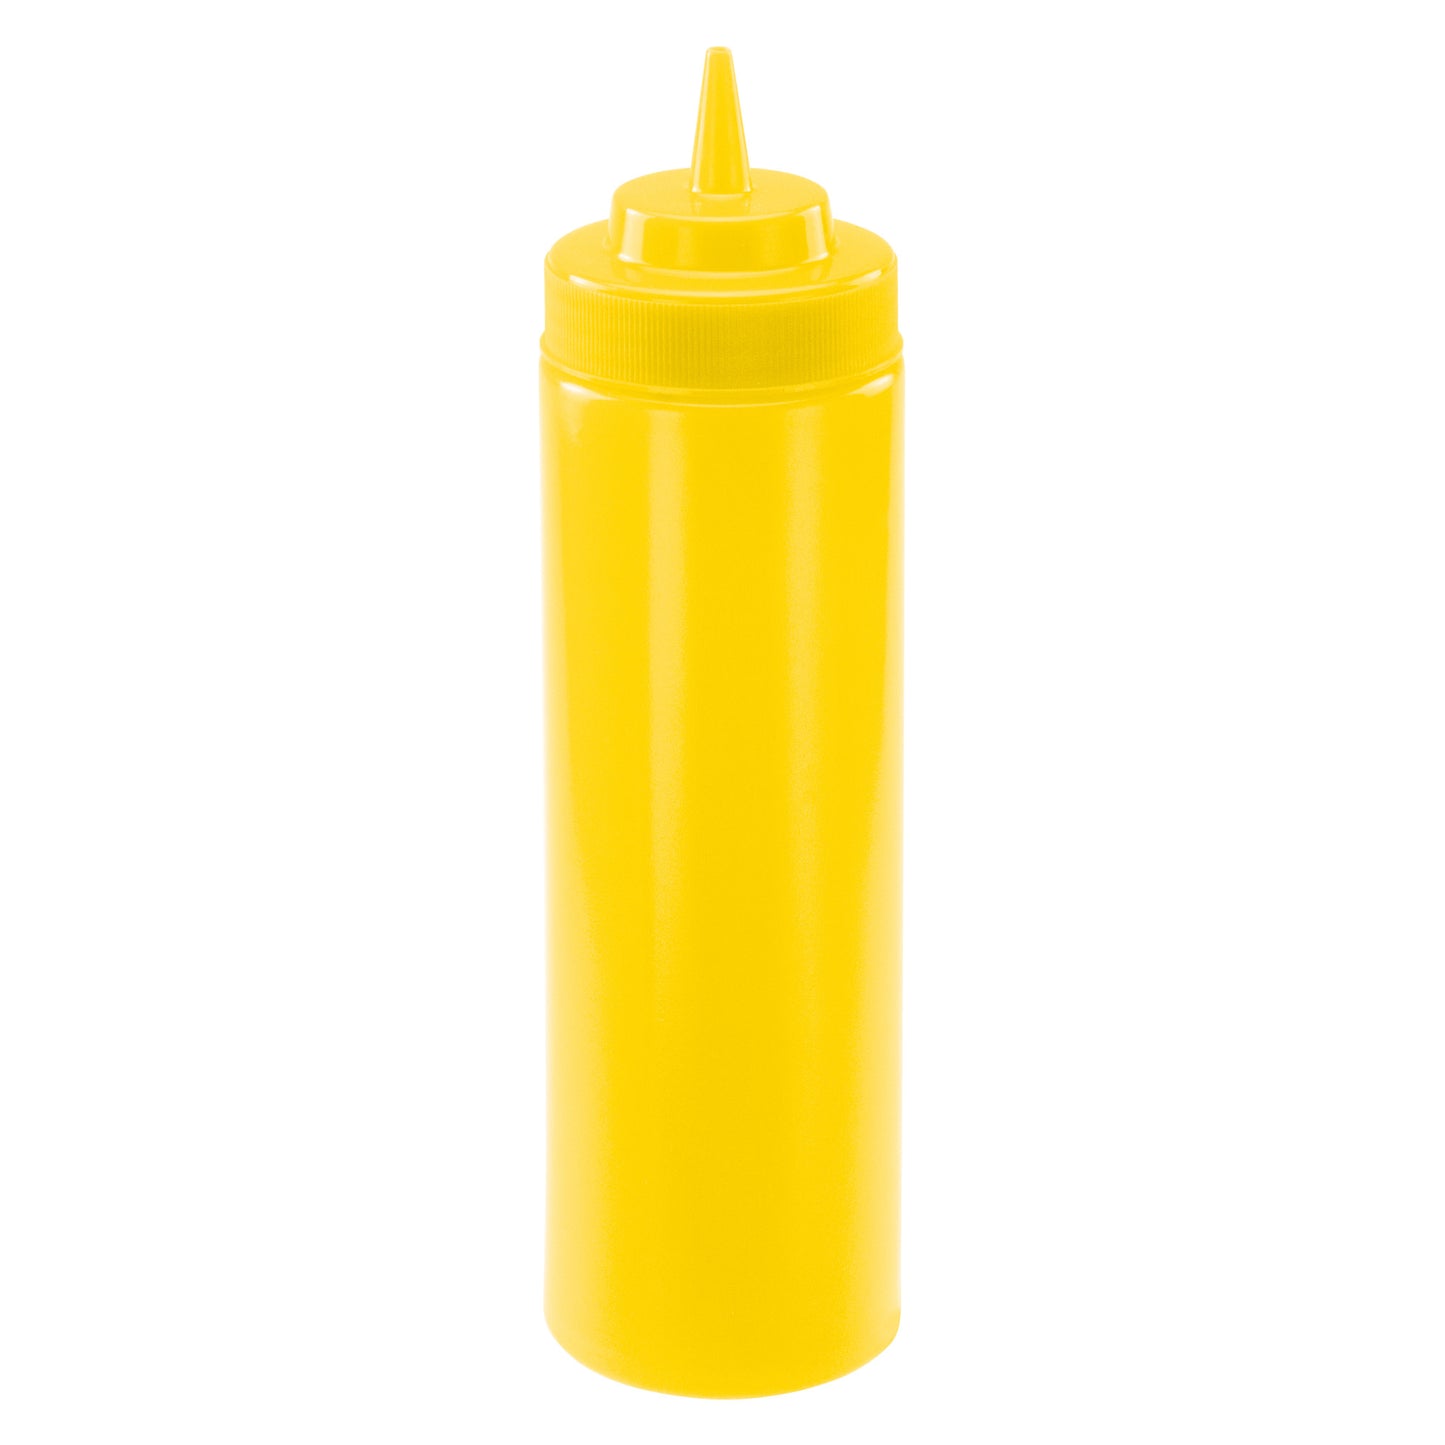 24oz Wide-Mouth Squeeze Bottles - Yellow